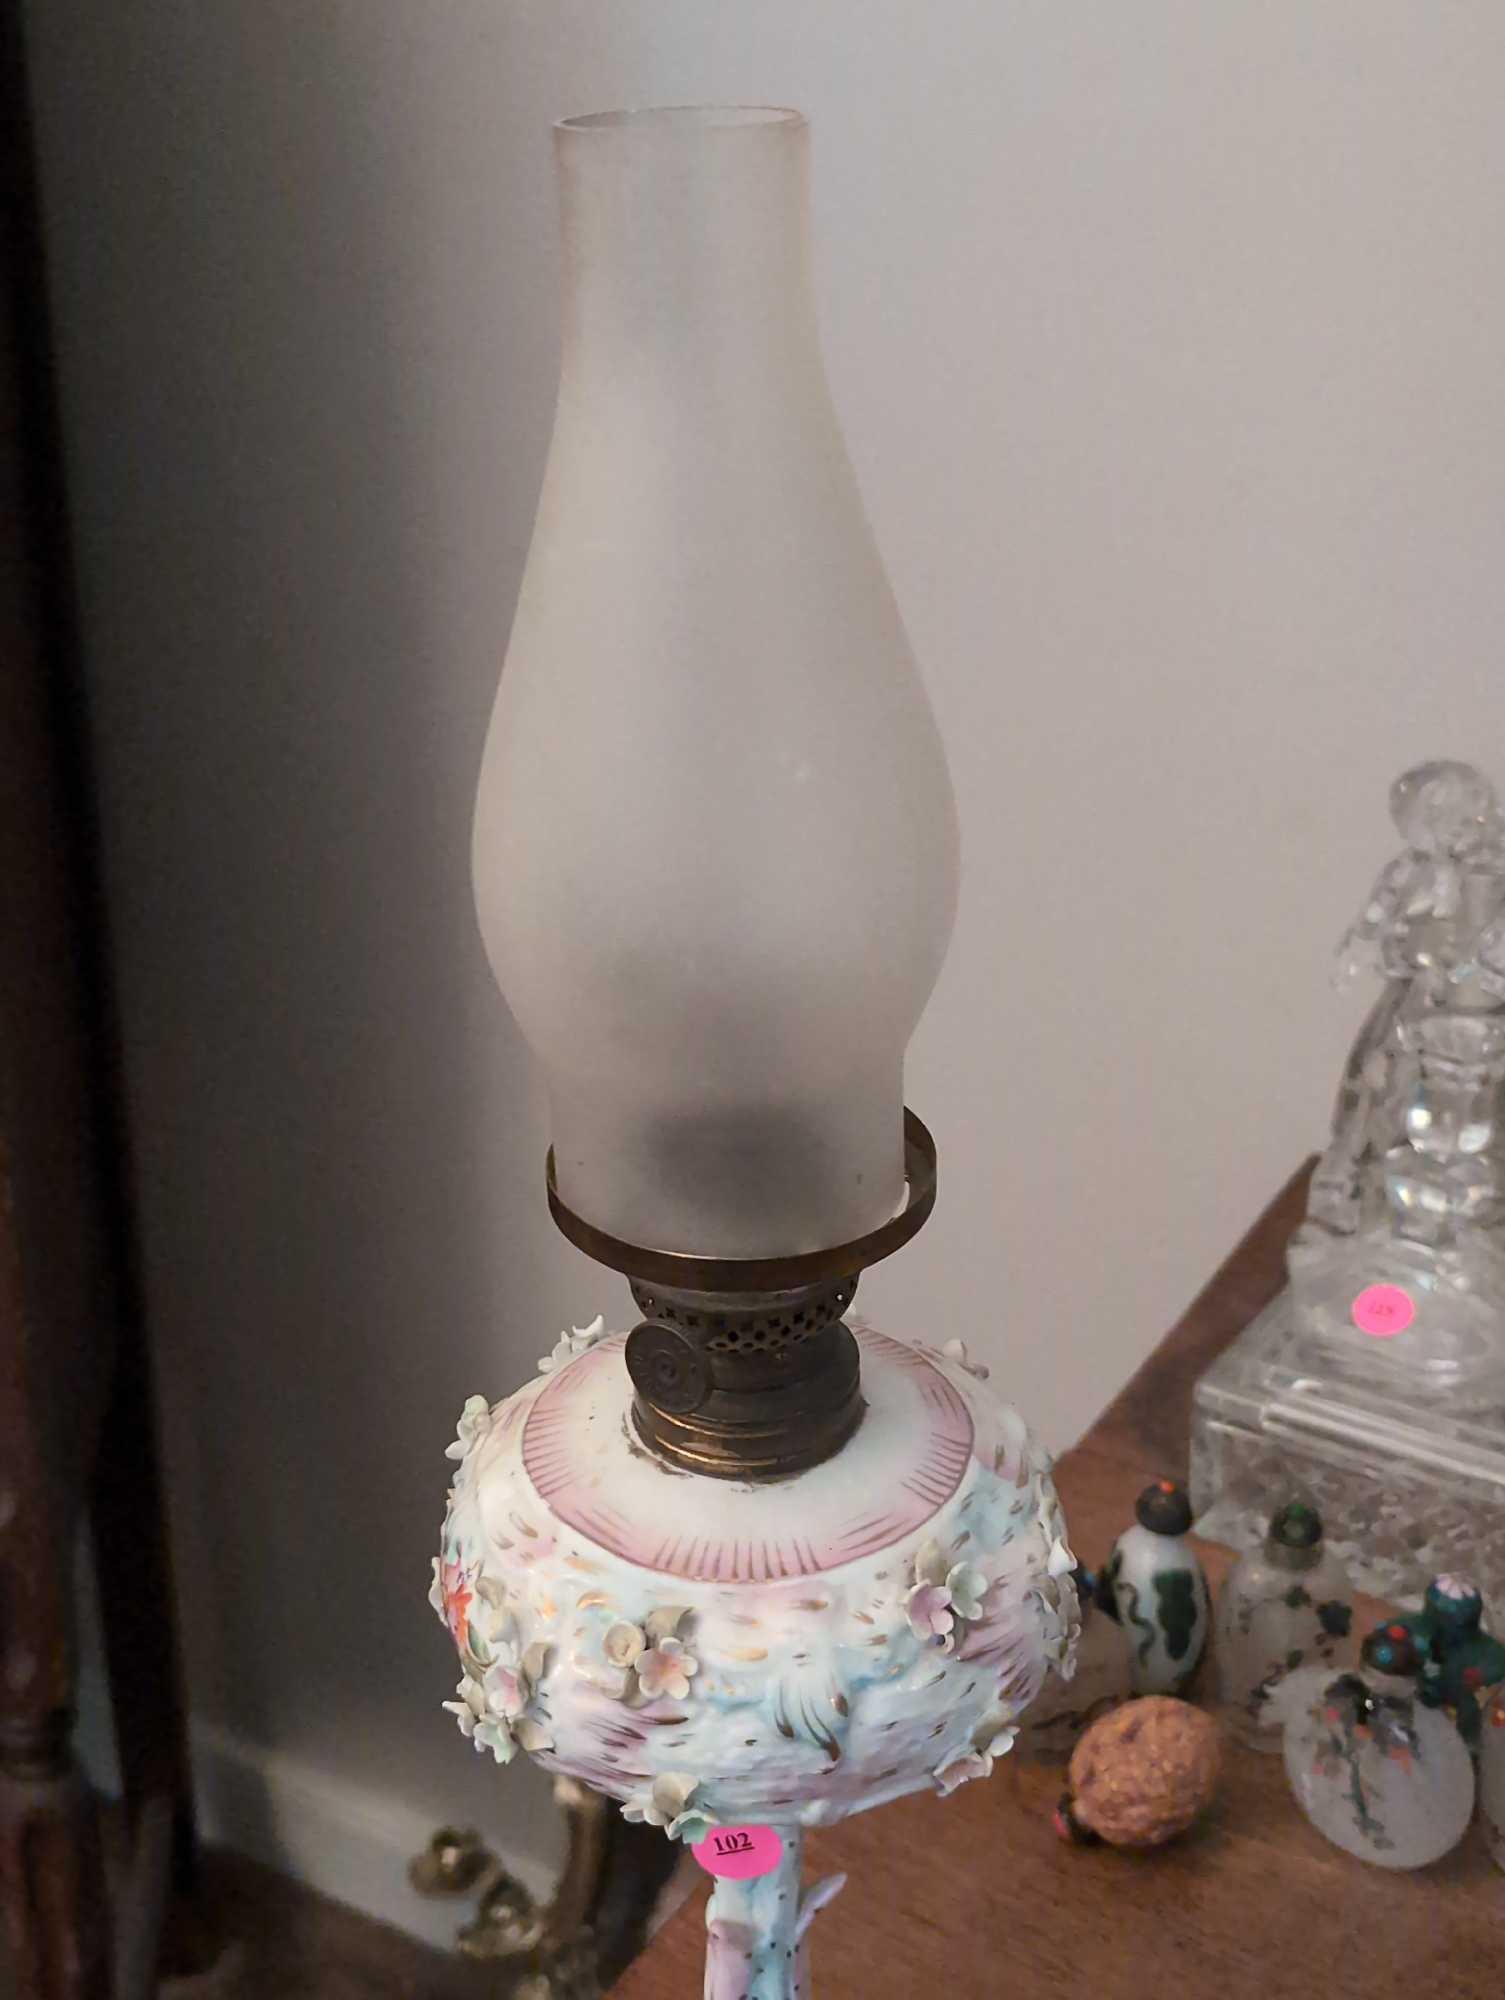 (LR) ANTIQUE PLUMB & ATWOOD (DR)ESDEN STYLE FLORAL DETAILED OIL LAMP WITH CHIMNEY. MEASURES